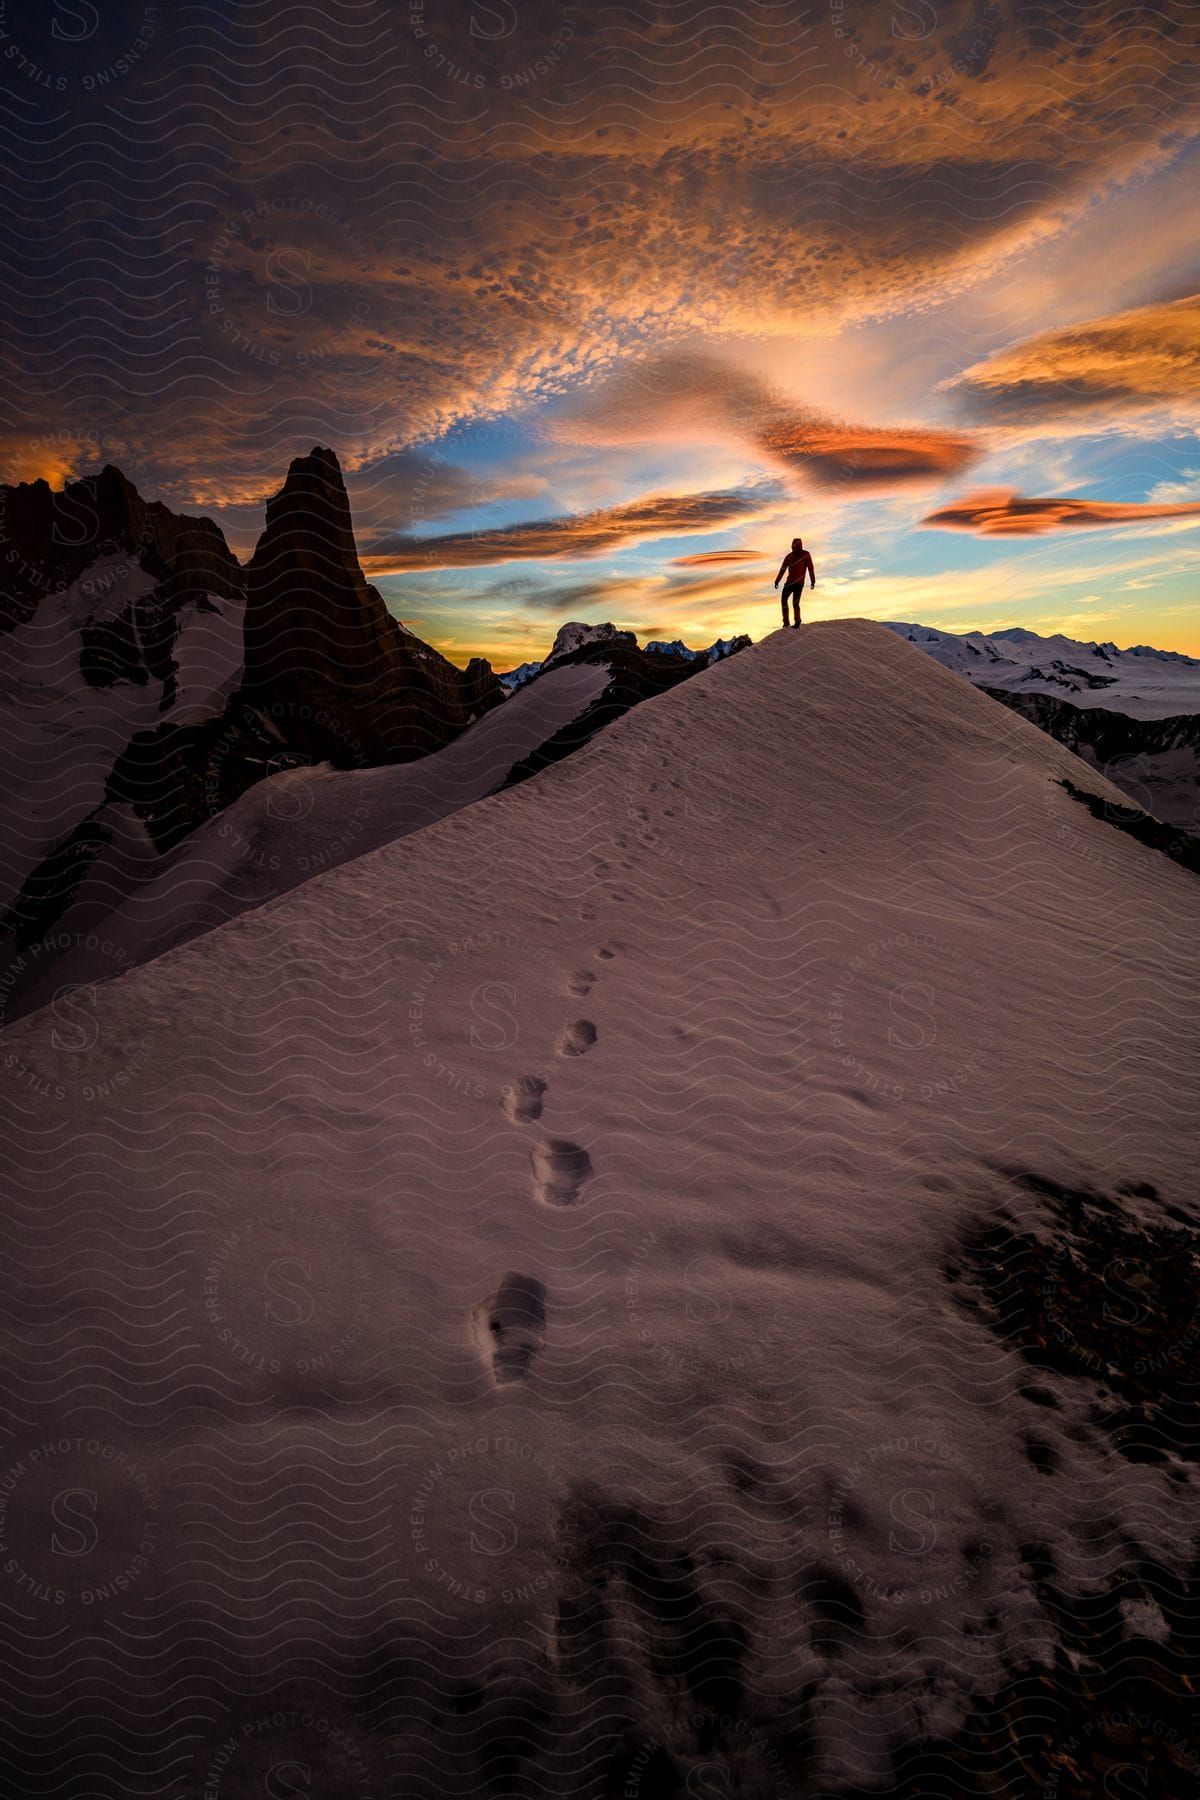 Snowy mountain landscape at dusk with a person at the top and footprints in the snow